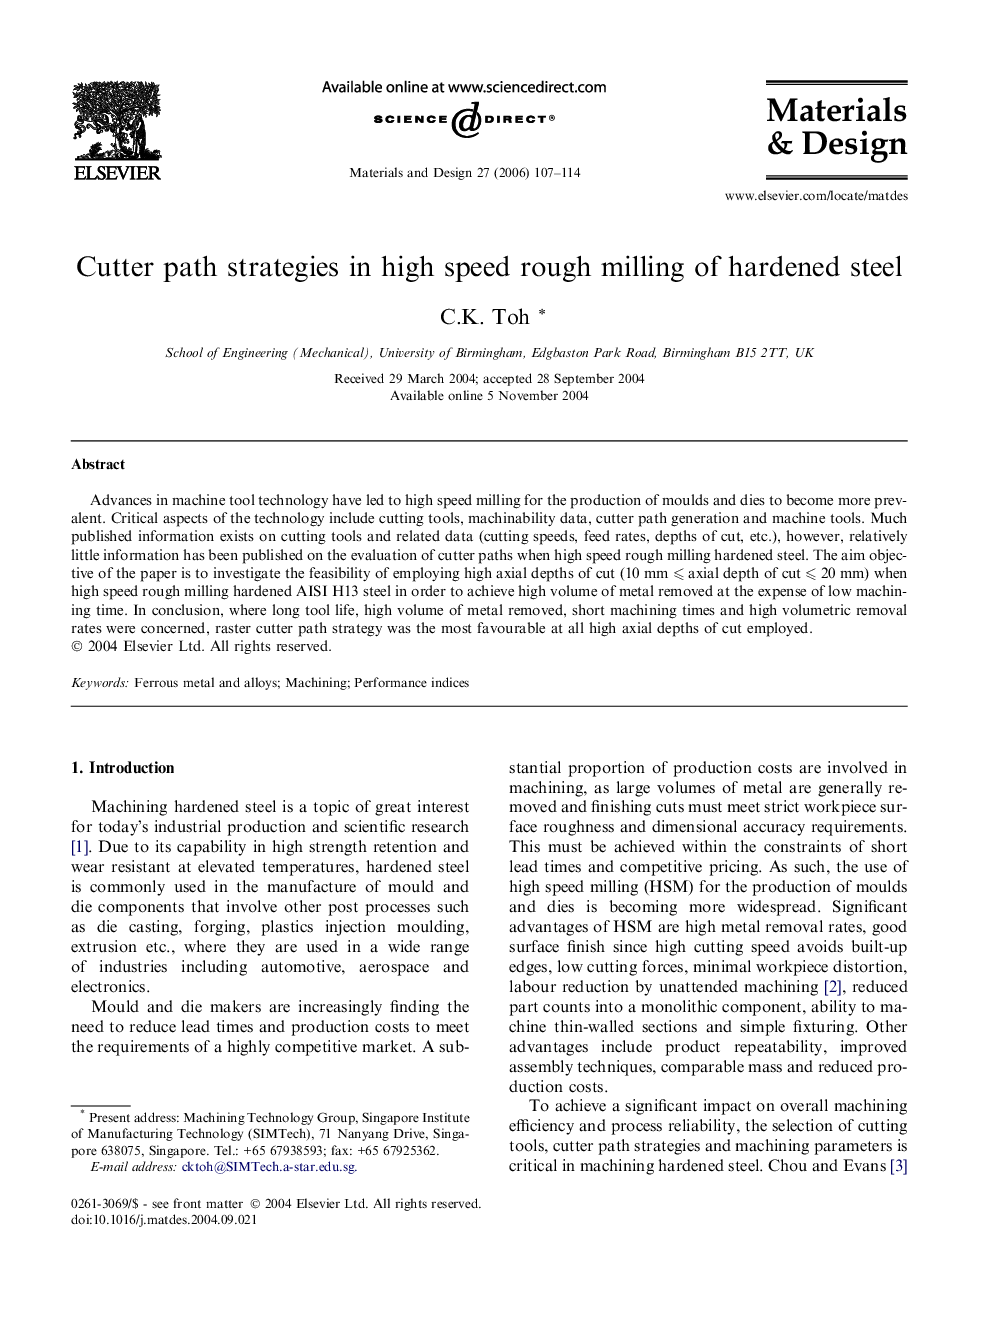 Cutter path strategies in high speed rough milling of hardened steel